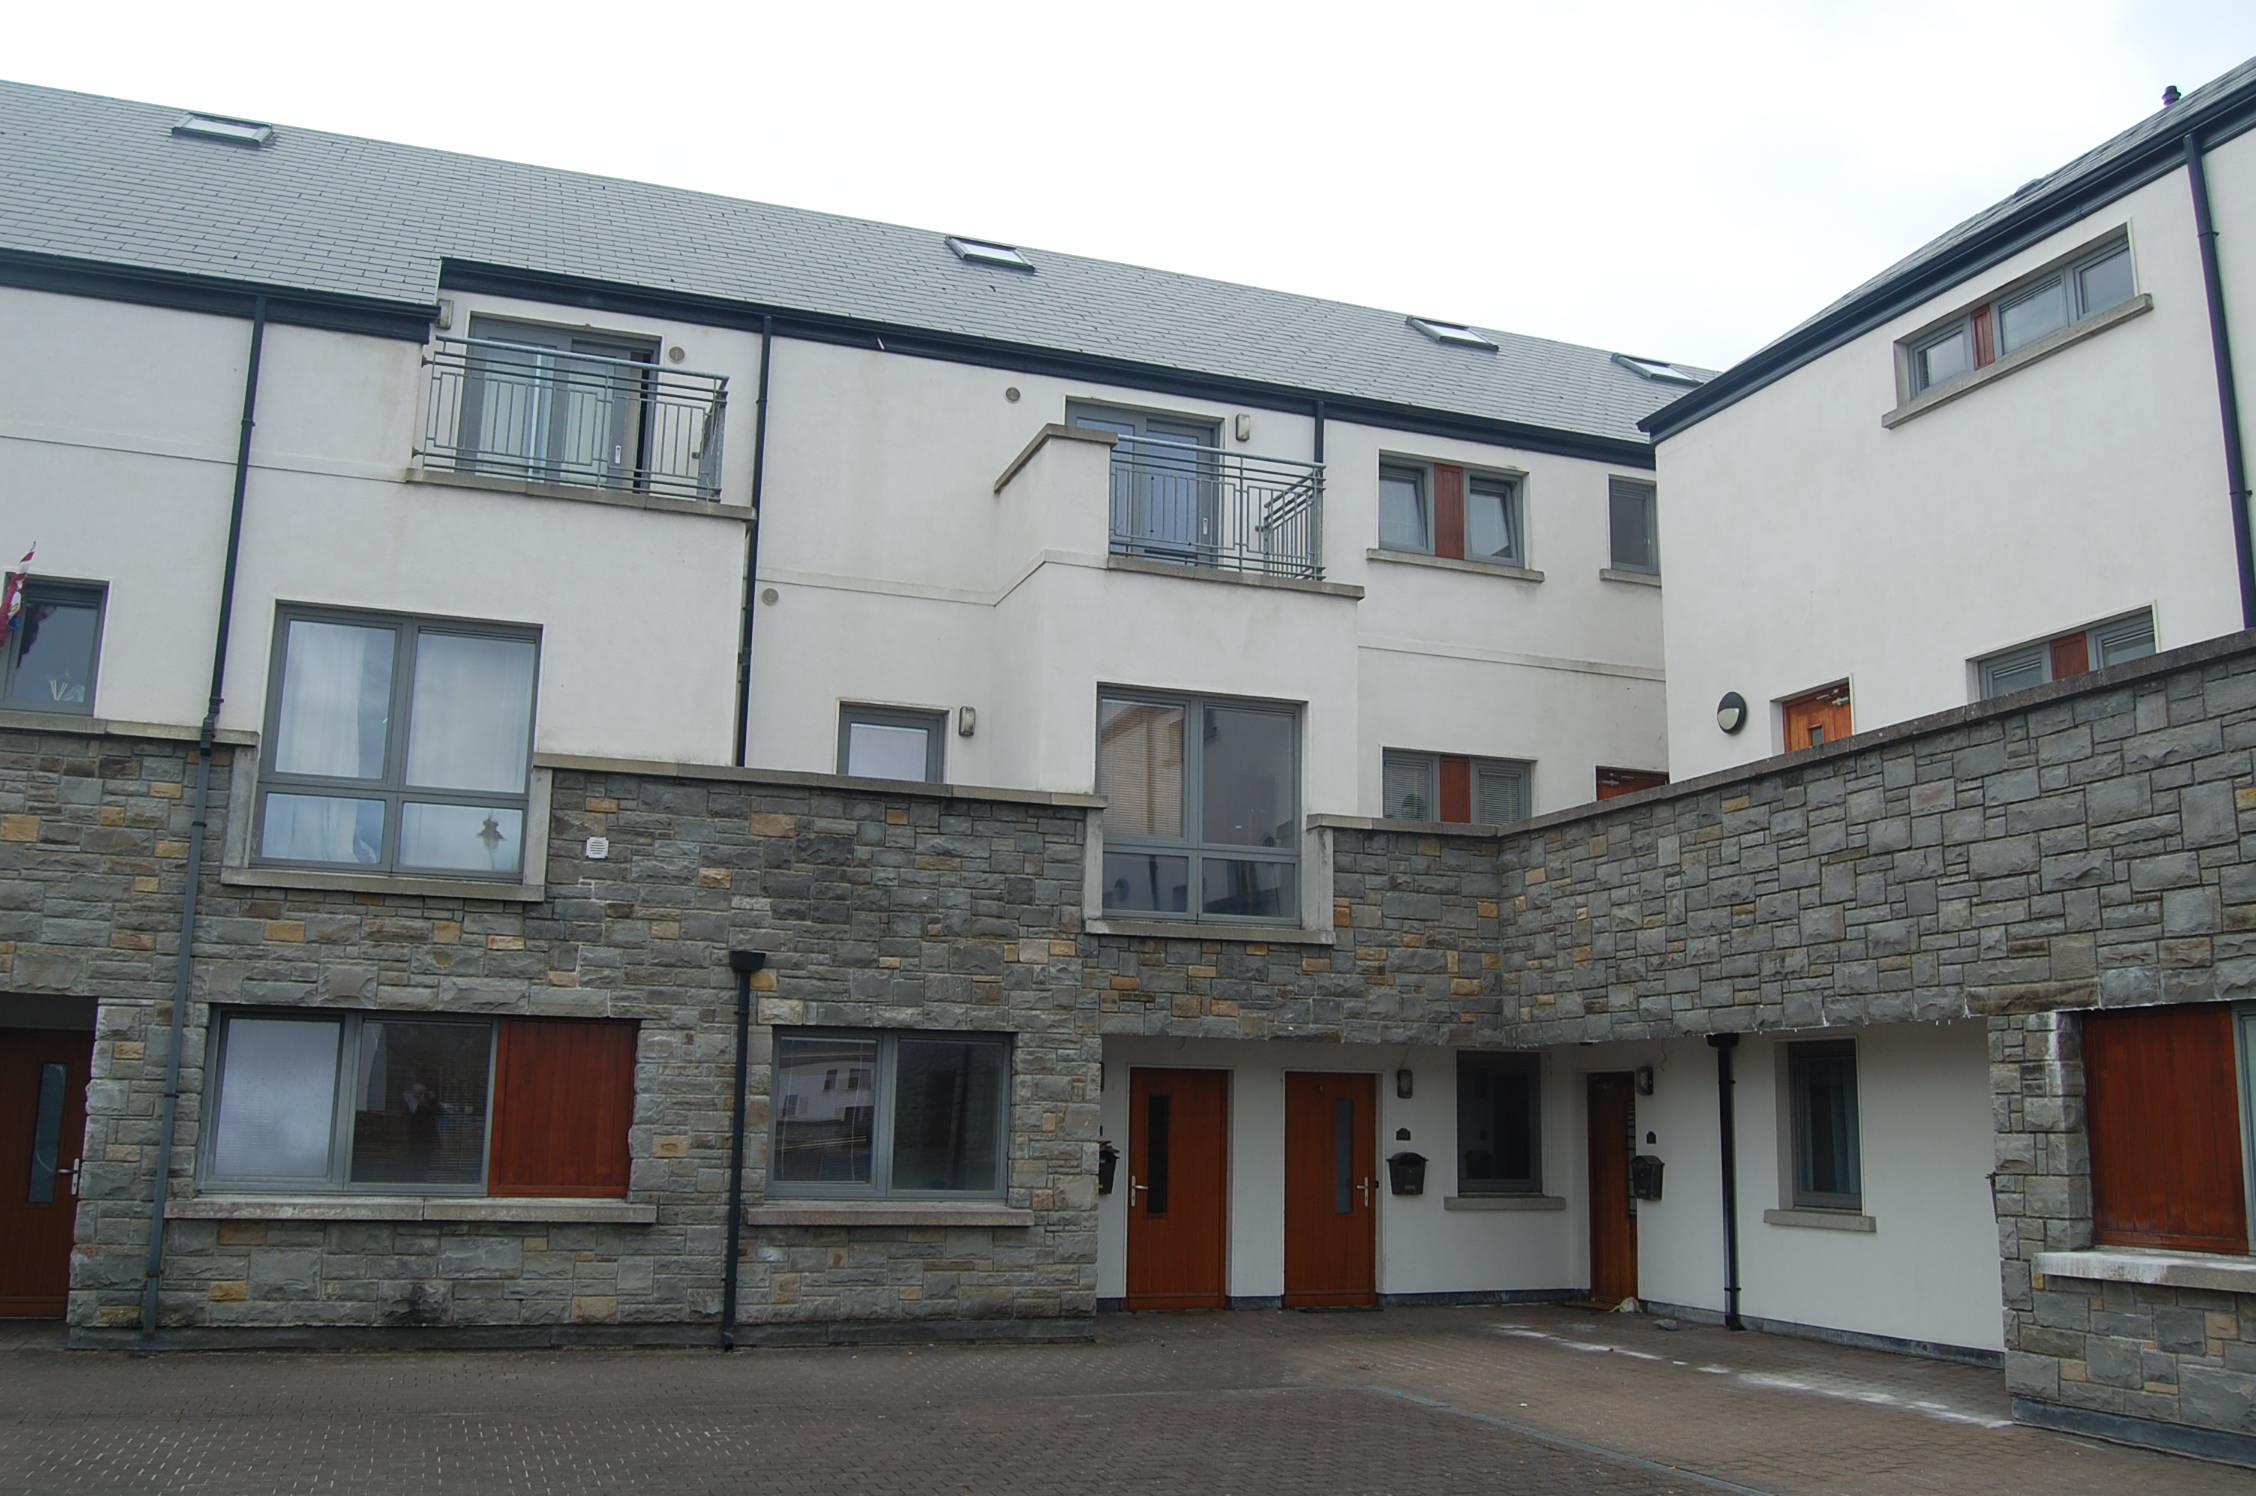 39 Caireal Mor, Headford Road, Galway, Headford Road, Galway City Suburbs Eircode: H91 PX82